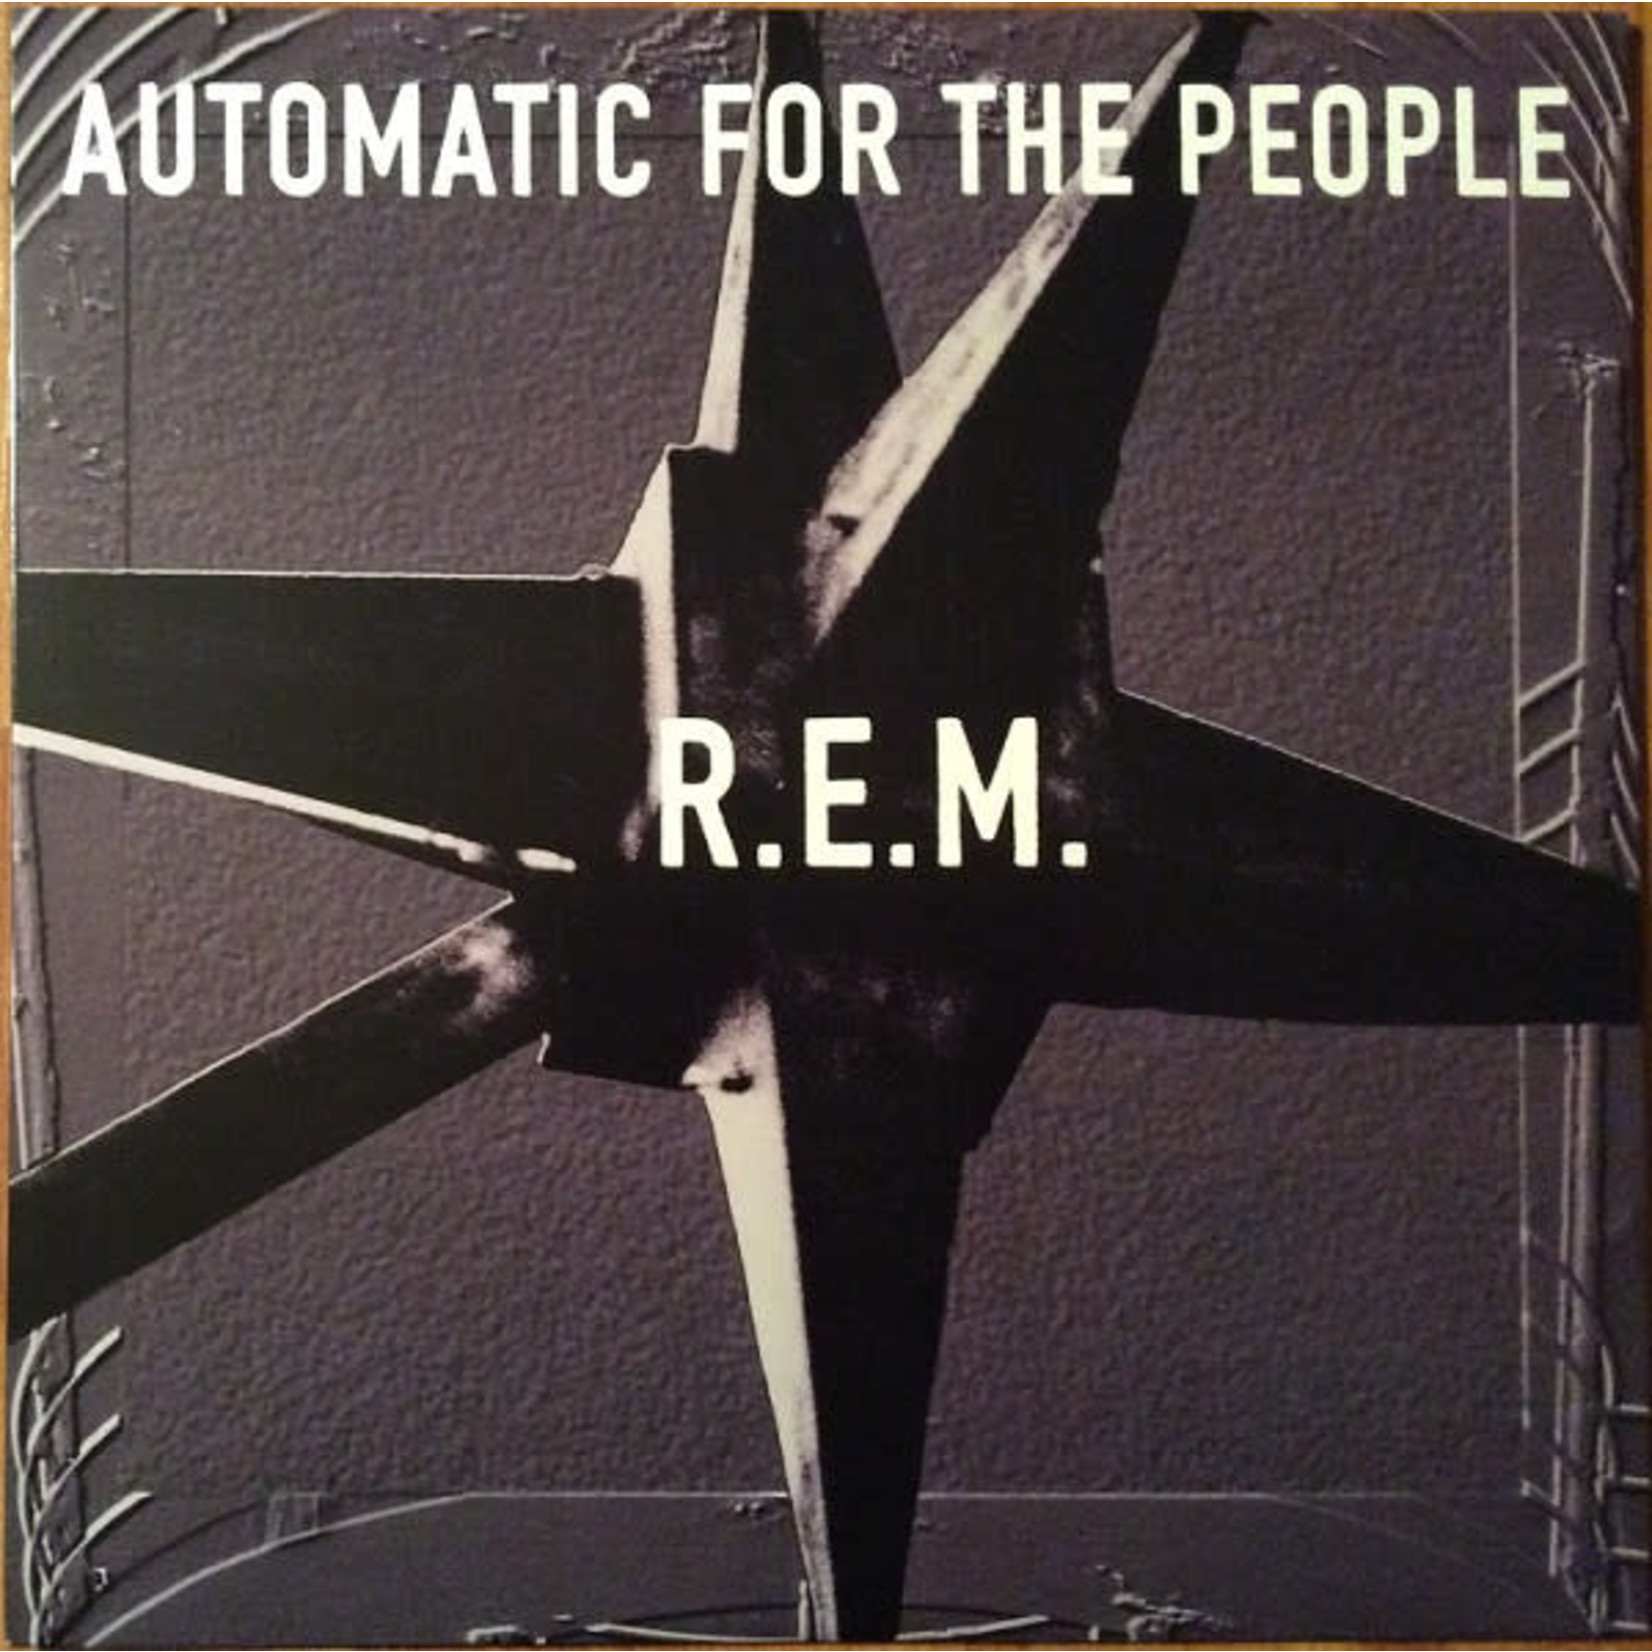 [New] R.E.M. - Automatic For the People (25th Anniversary Edition)